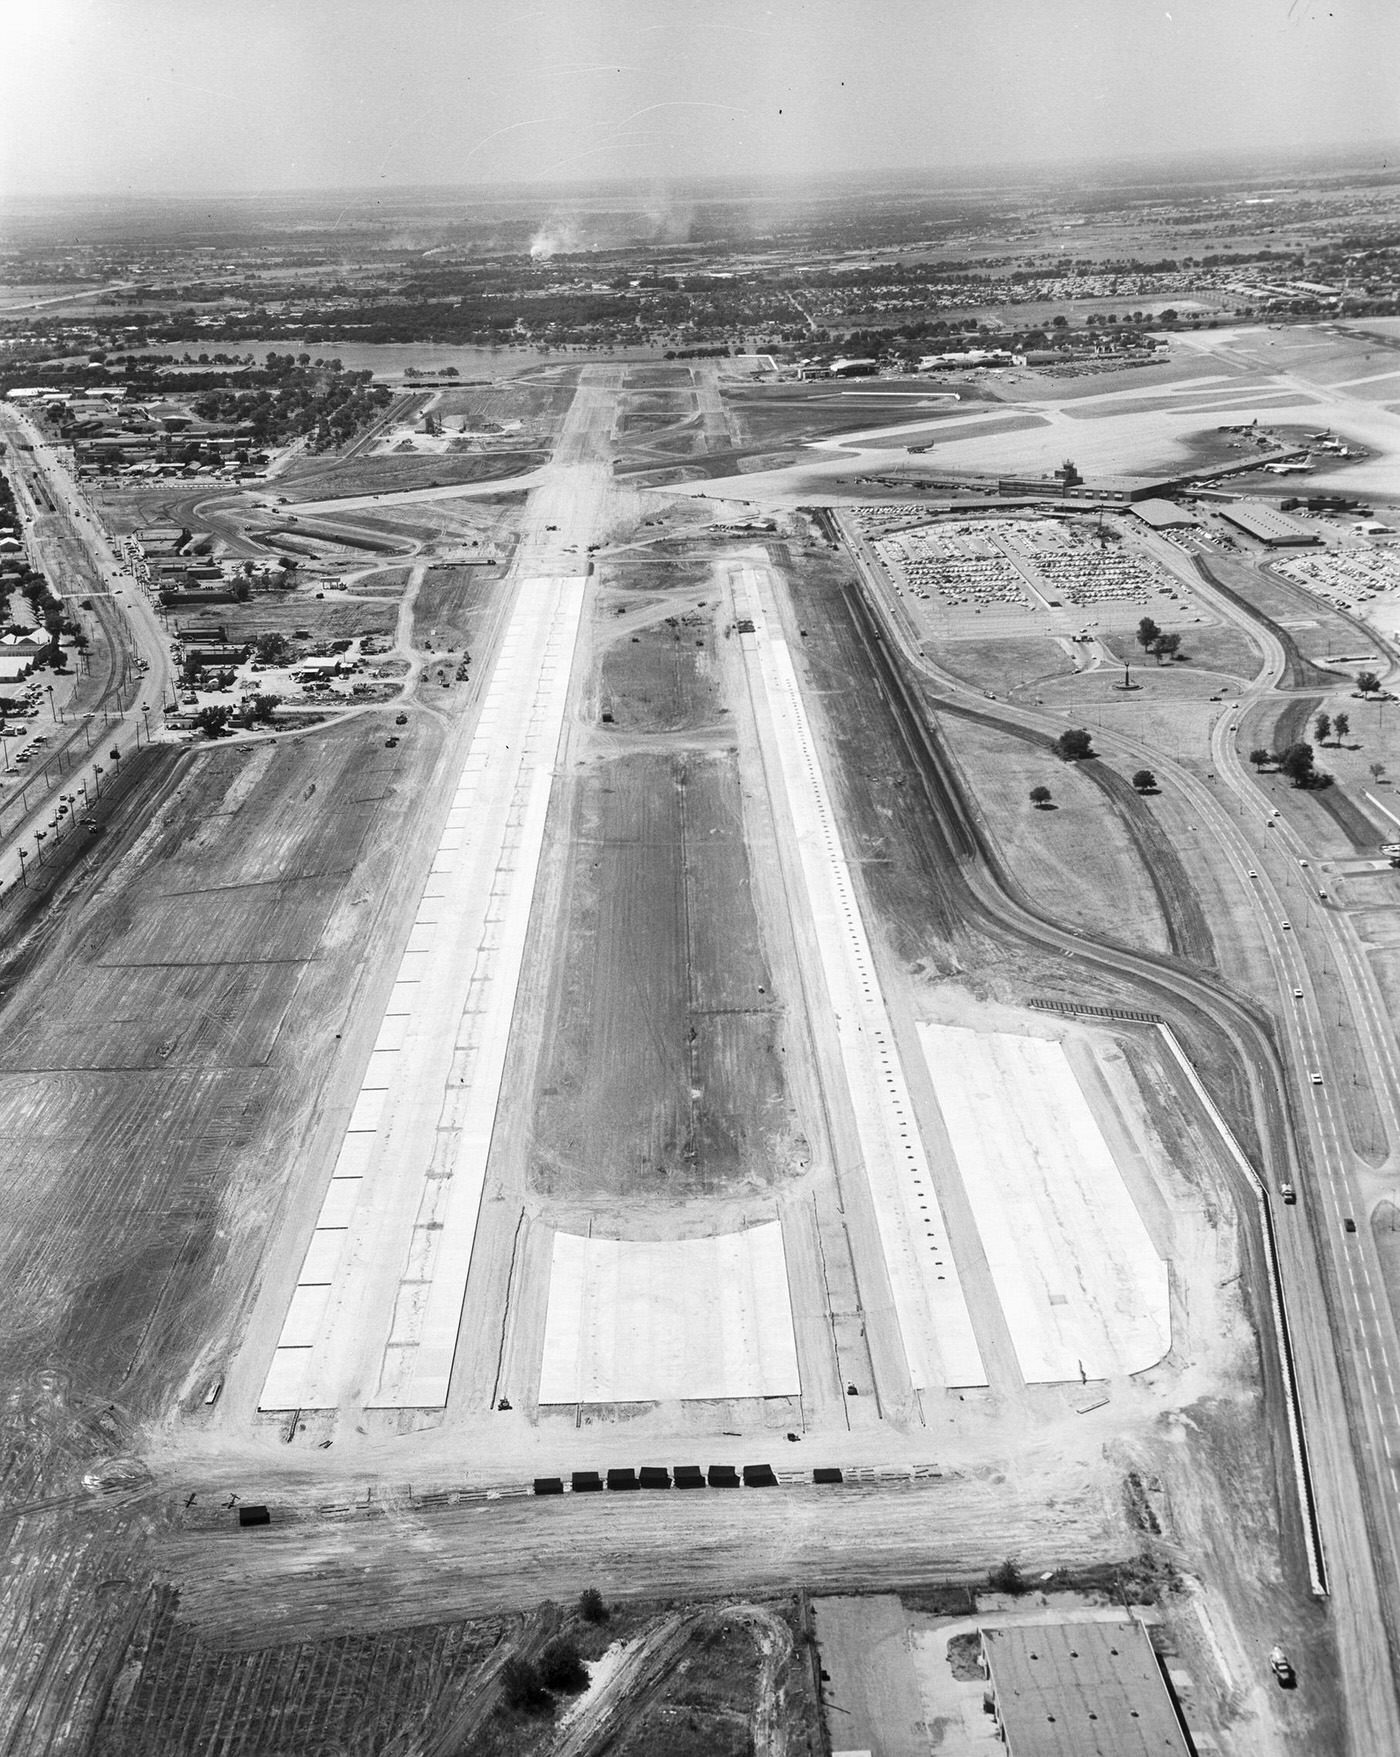 Runway at Love Field, Dallas. There are airplanes parked, 1960